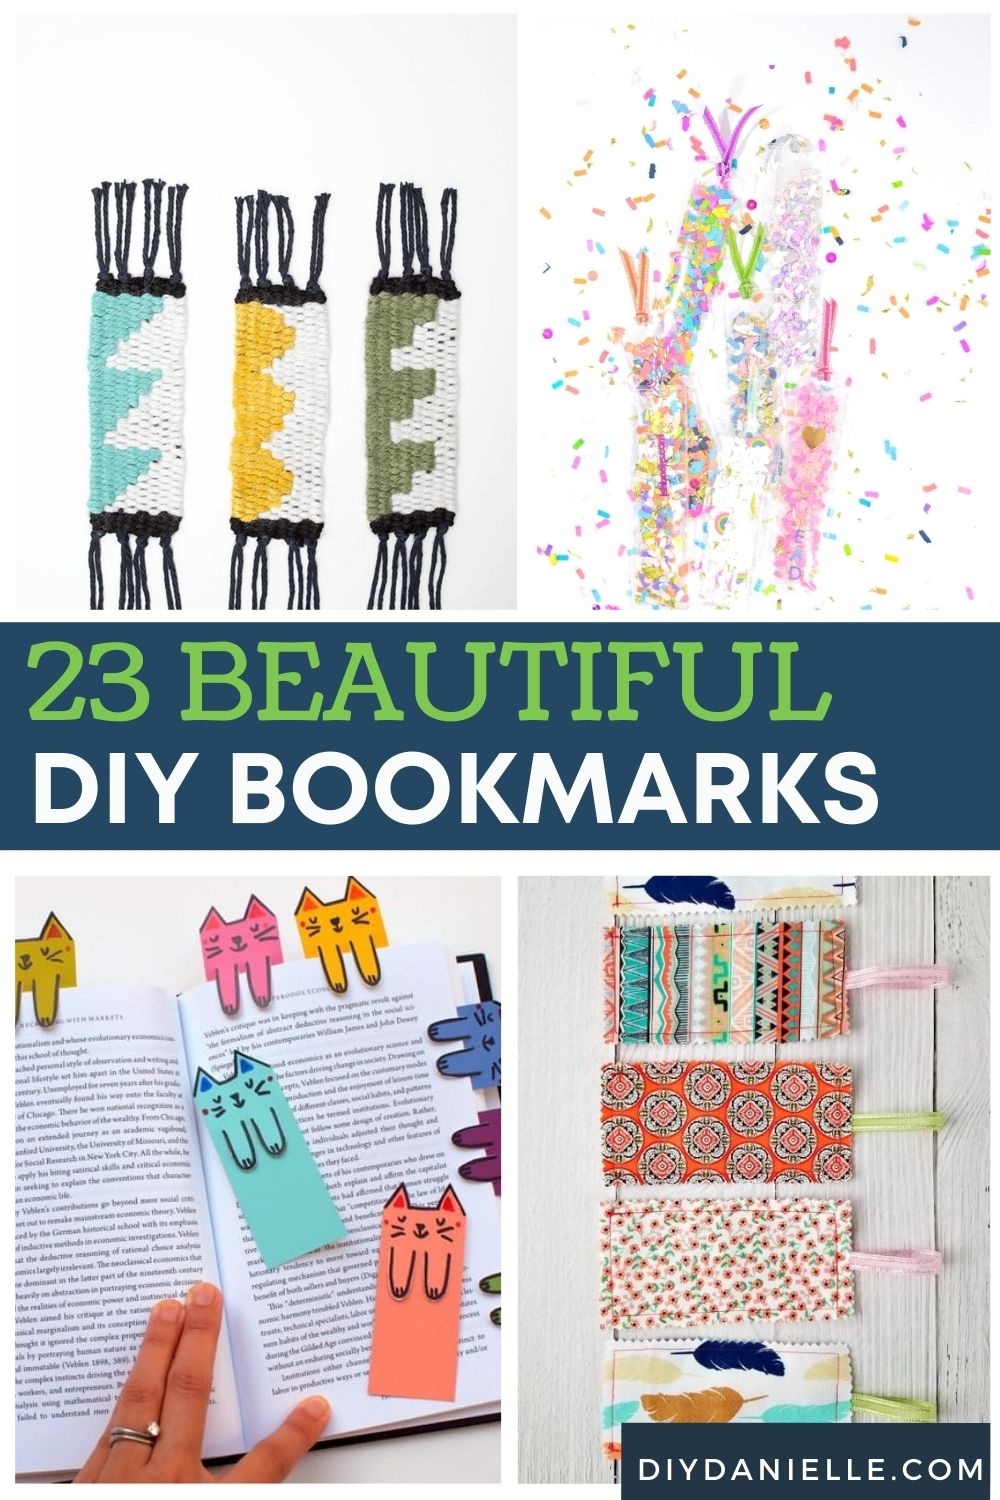 DIY Bookmarks: Beautiful Bookmarks to Make for Gifts